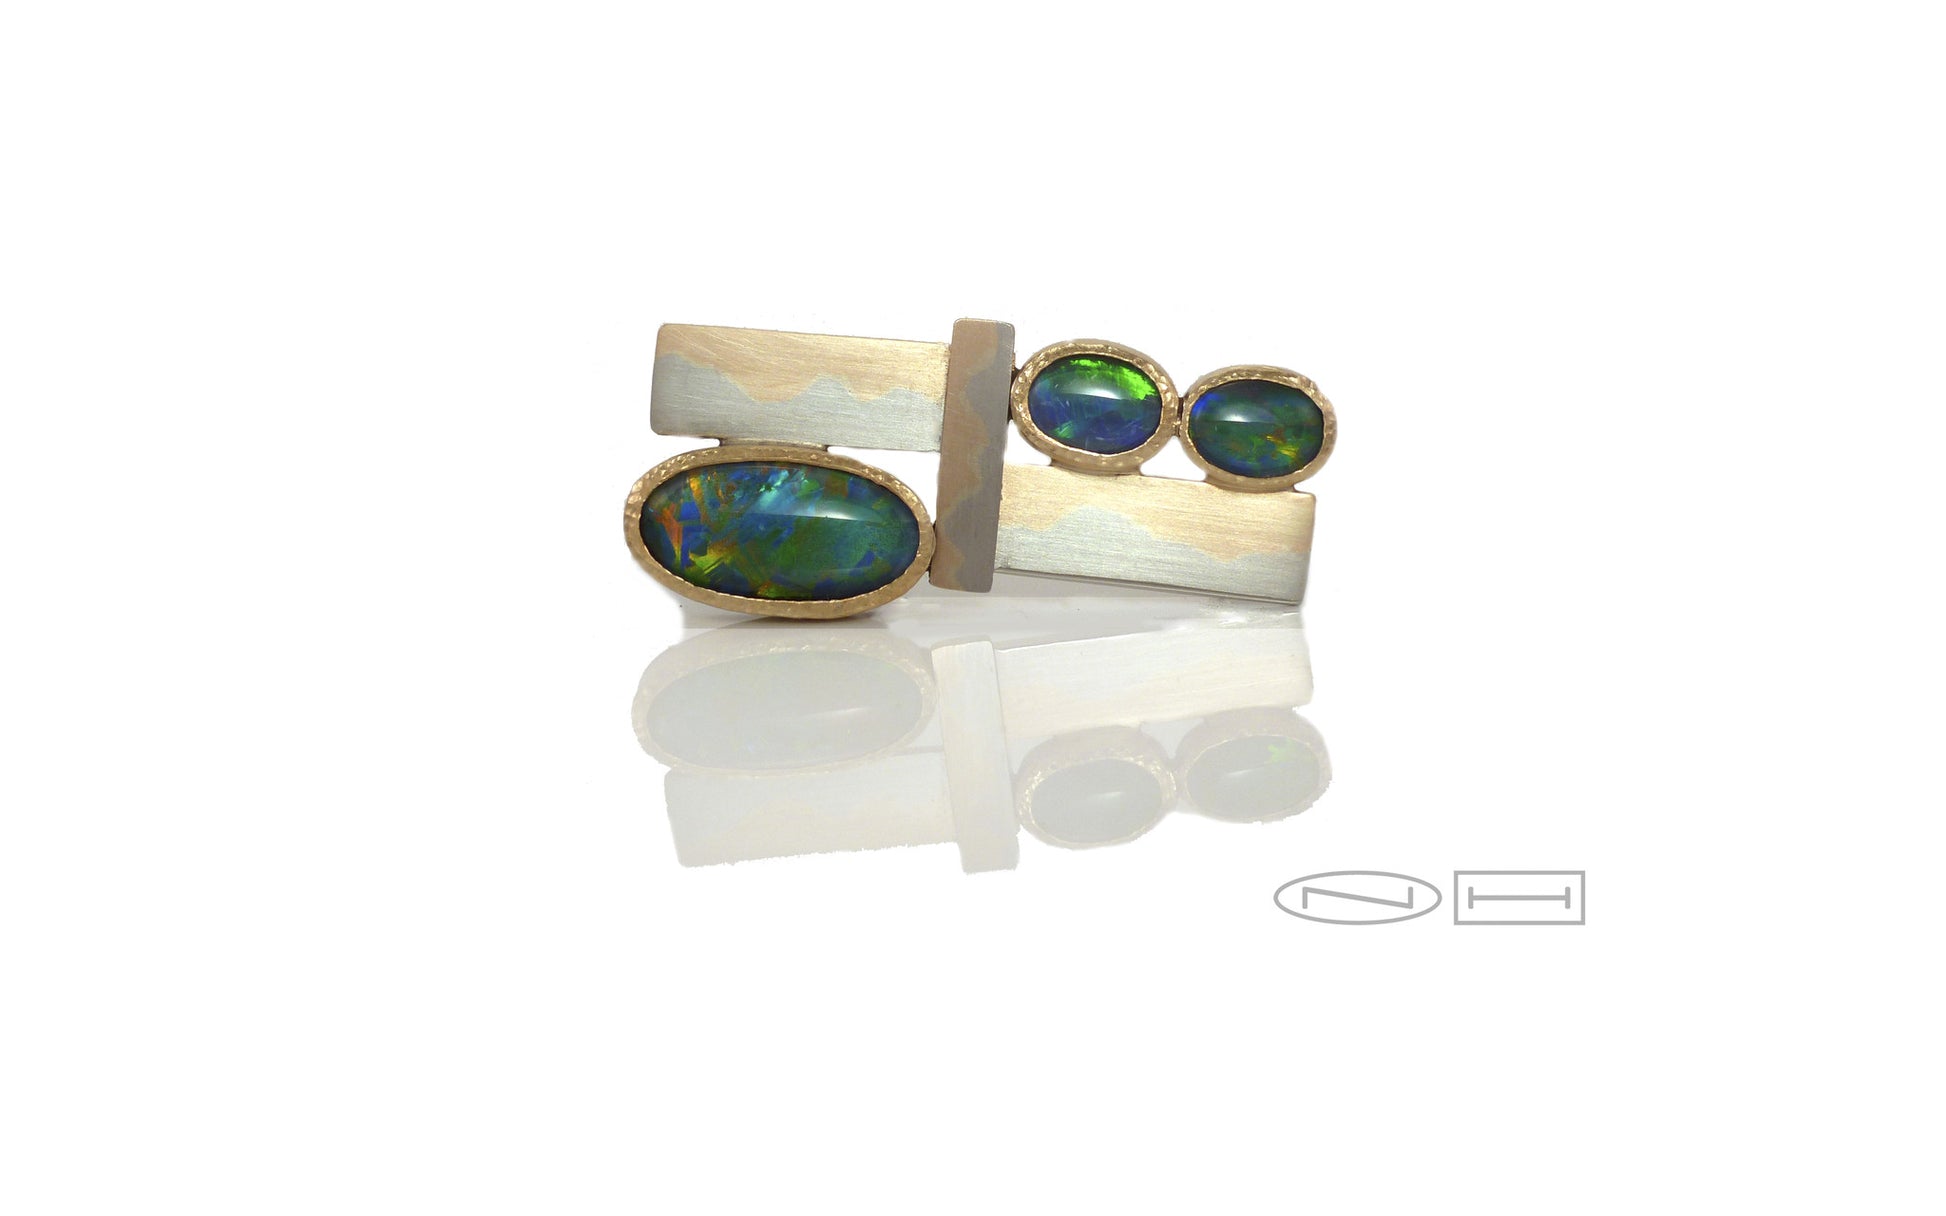 Bespoke Black Opal broach, in 18kt Yellow and white gold,  by ZEALmetal, Nicole Horlor, in Kingston, ON, Canada 